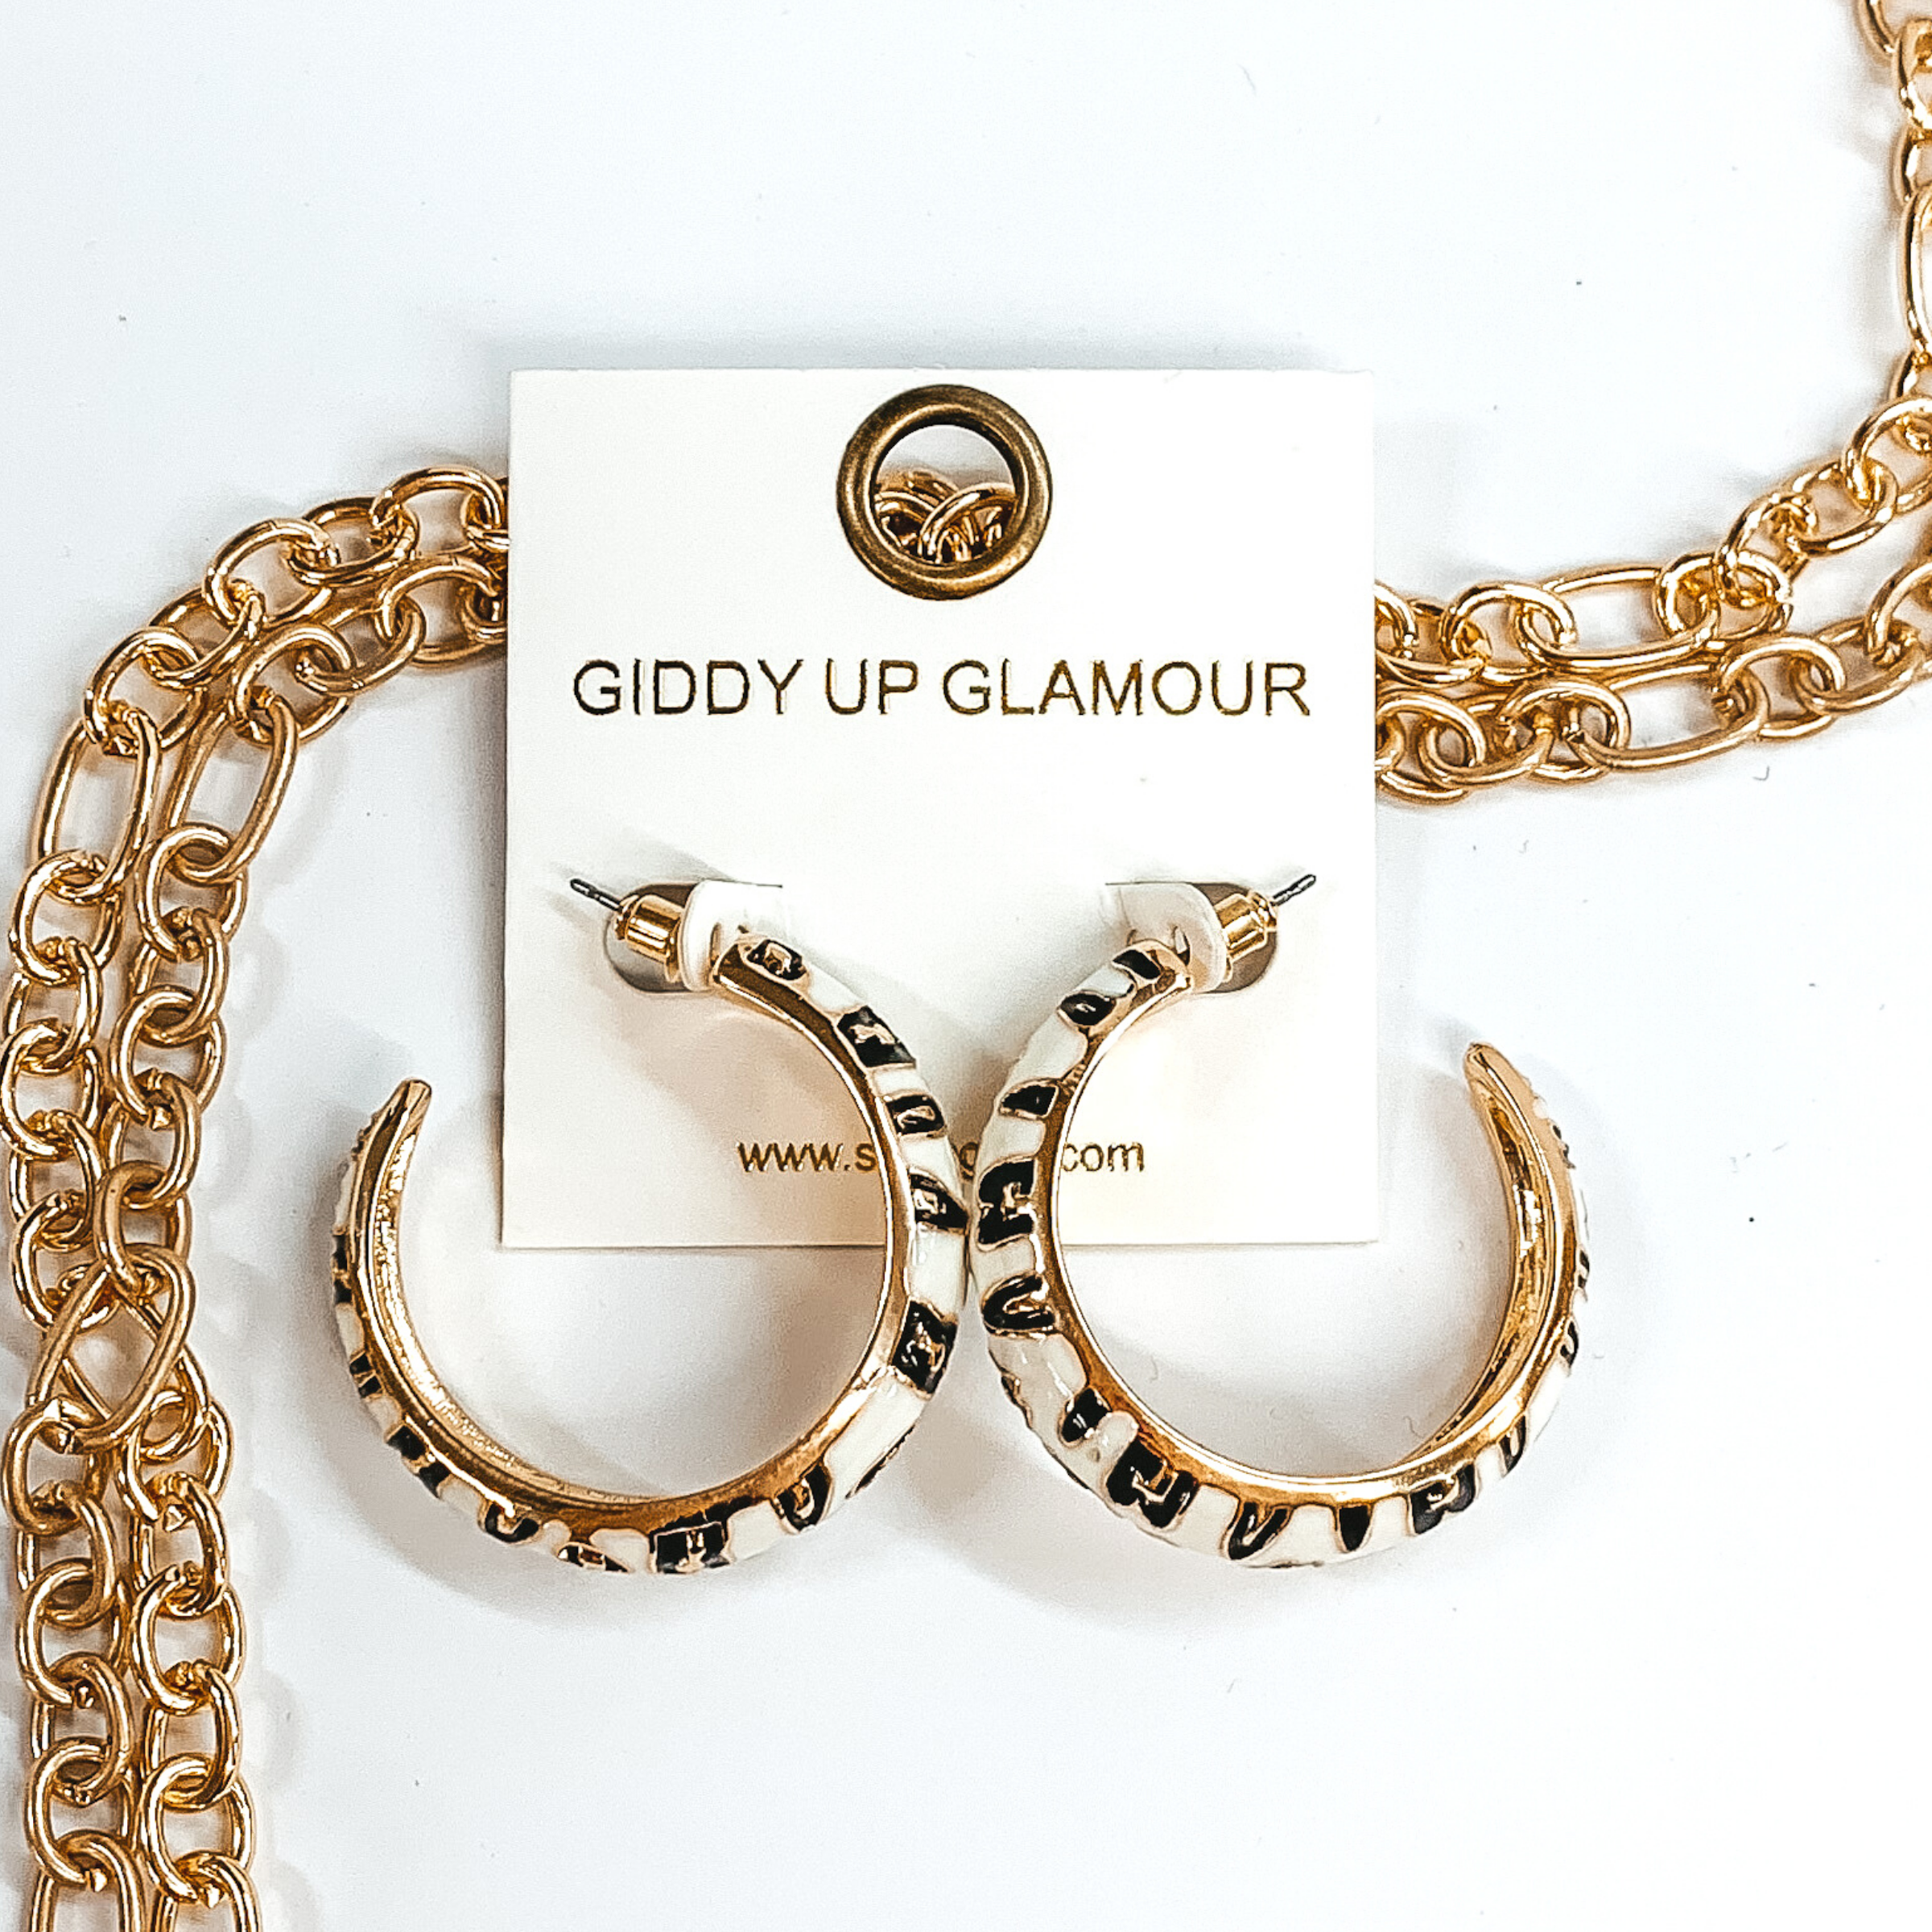 Large, gold outline, white hoop earrings with black and gold leopard print.These earrings are pictured on a white earrings holder, laying on top of gold chains on a white background.